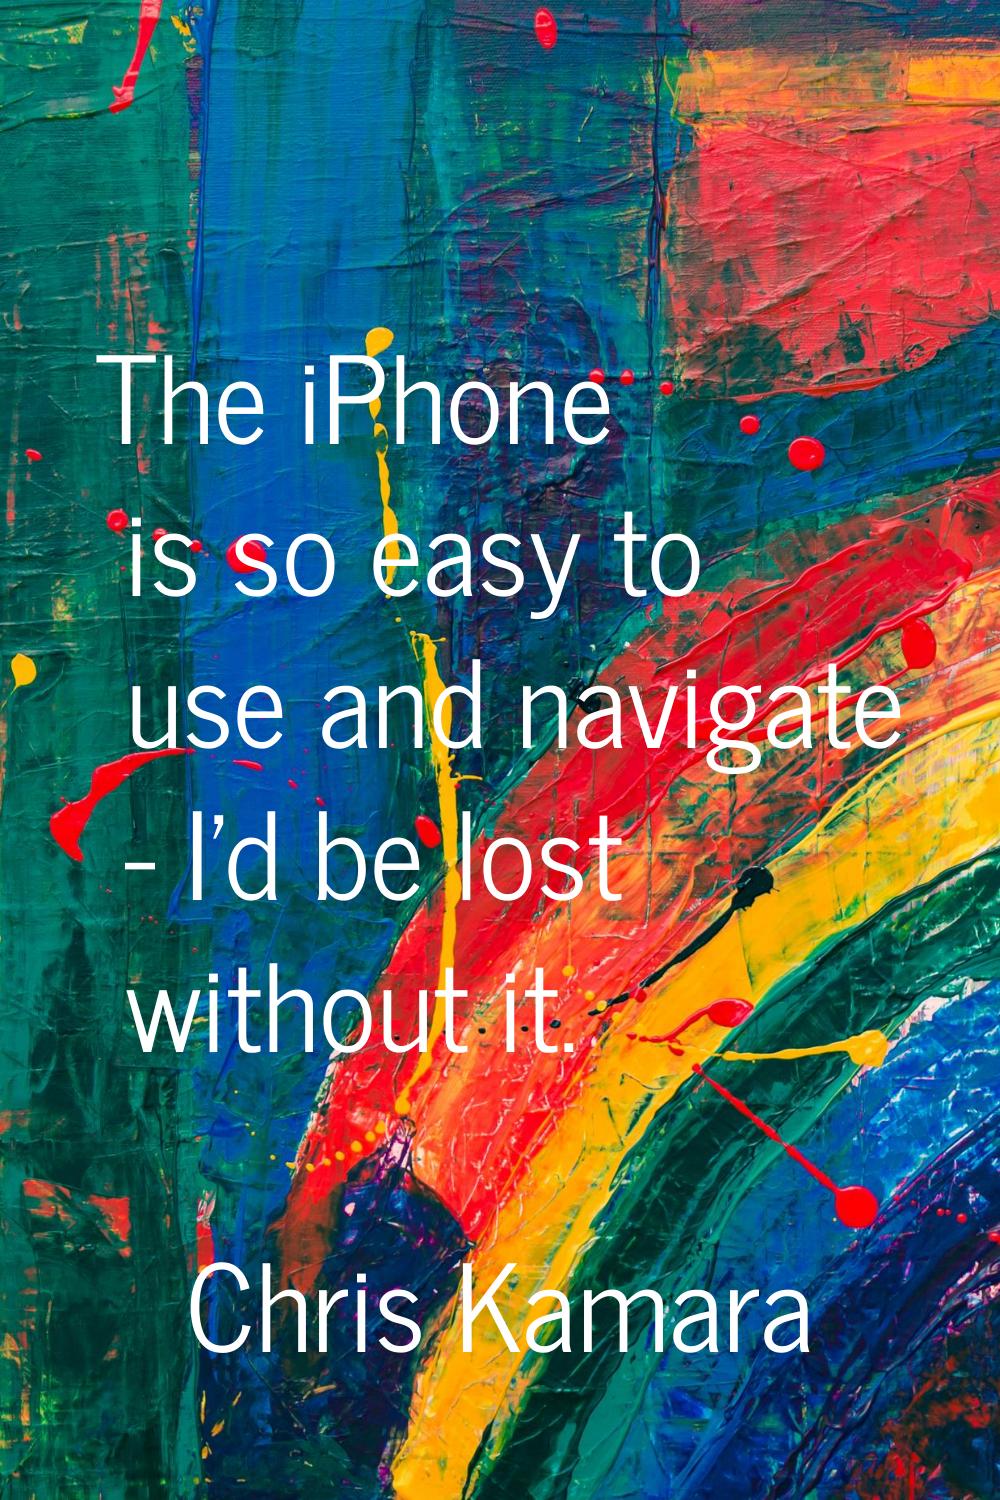 The iPhone is so easy to use and navigate - I'd be lost without it.